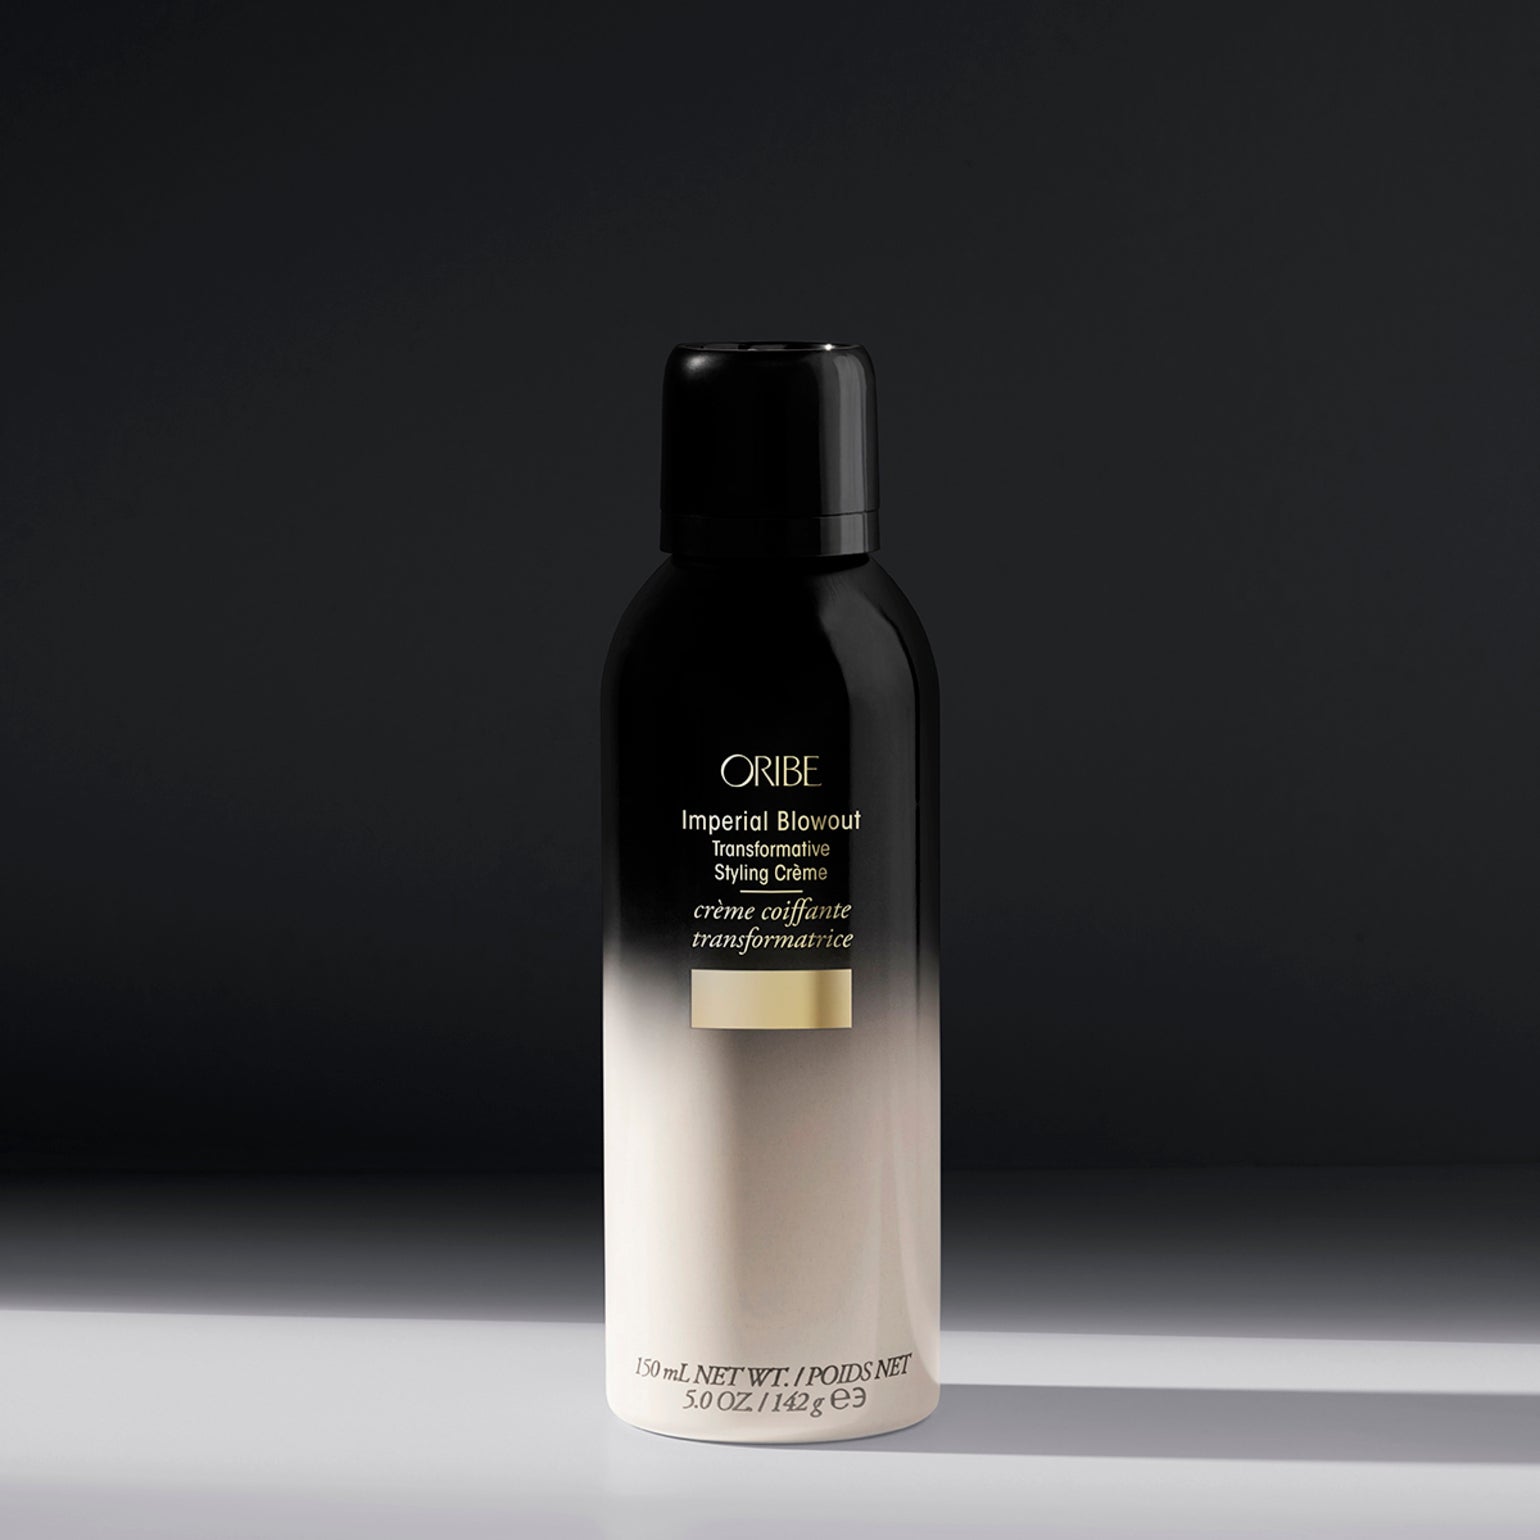 Imperial Blowout Transformative Styling Crème - Oribe Hair Care